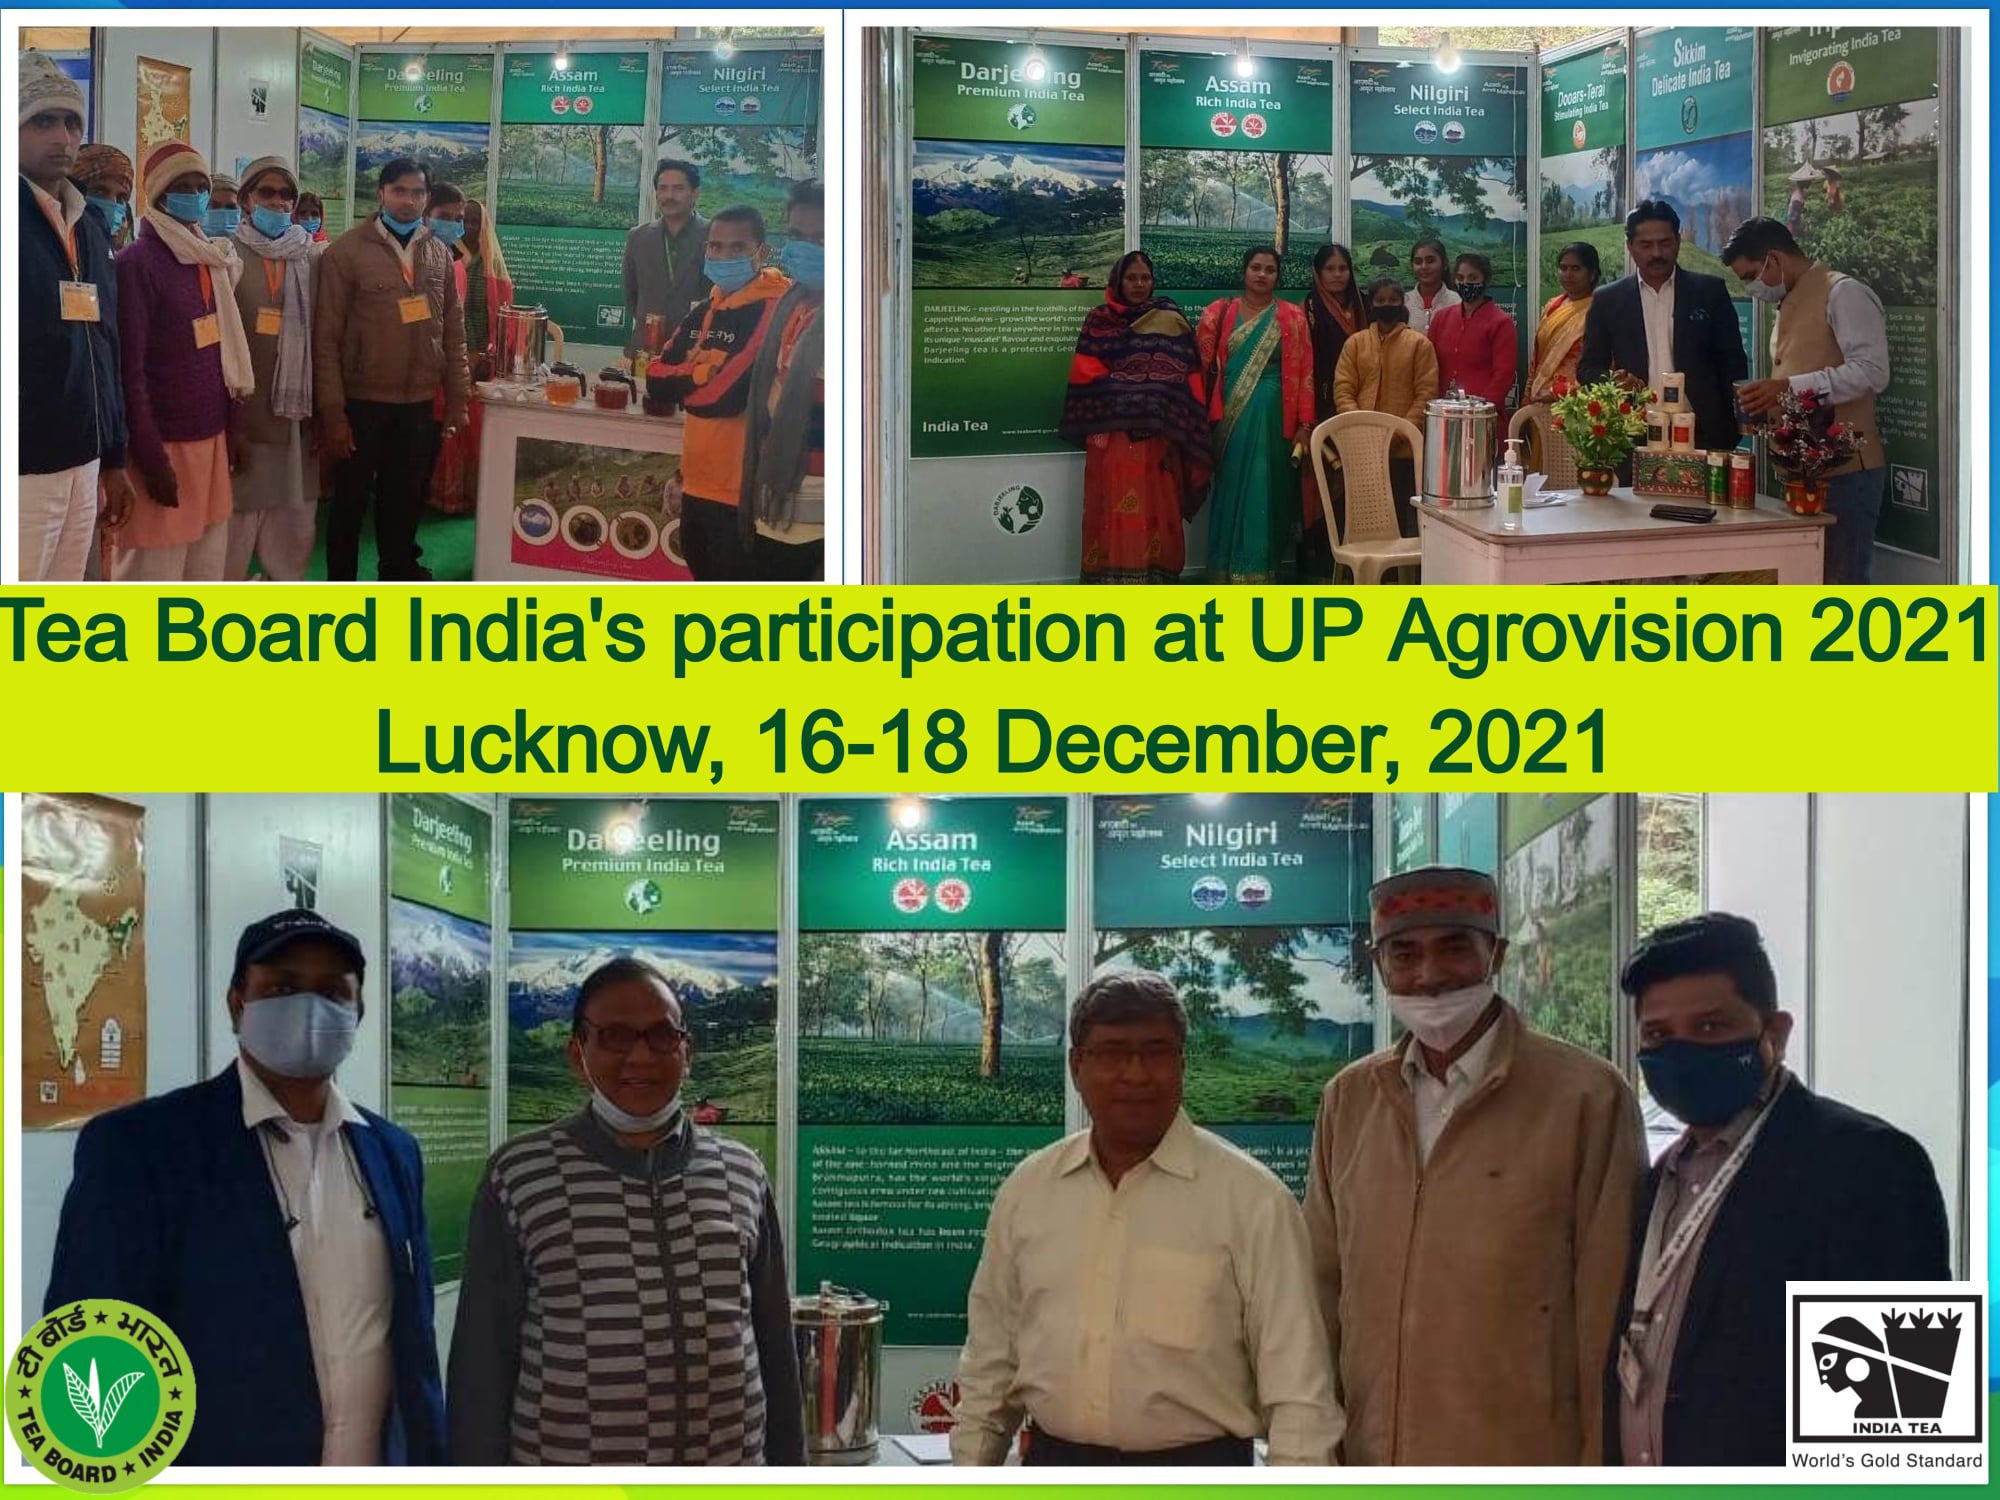 Tea Board India's participation at UP Agrovision 2021, Lucknow, 16-18 December 2021